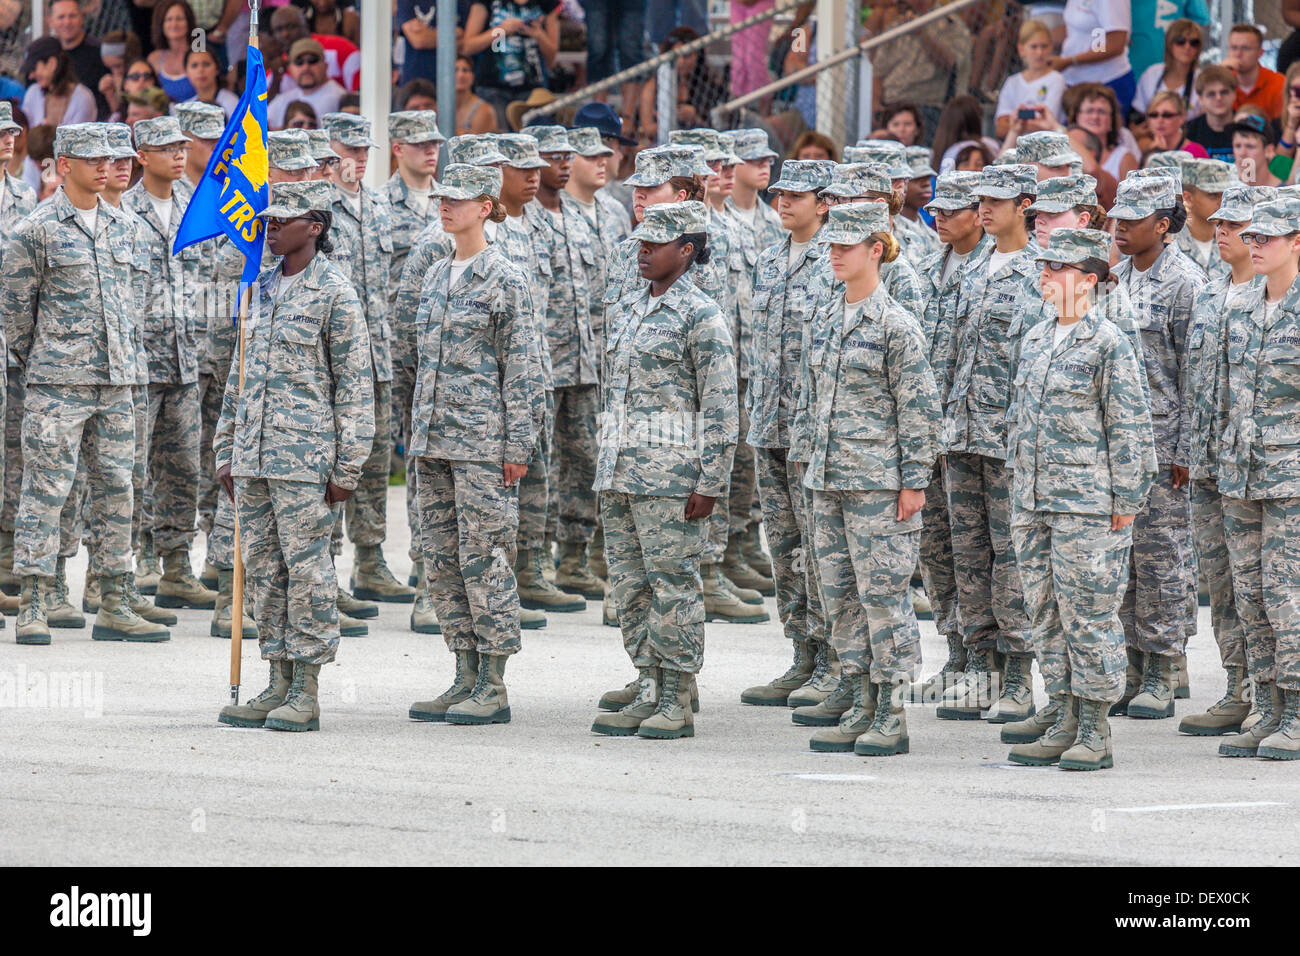 Flight of female airmen at attention in formation during United States Air Force basic training graduation ceremonies Stock Photo